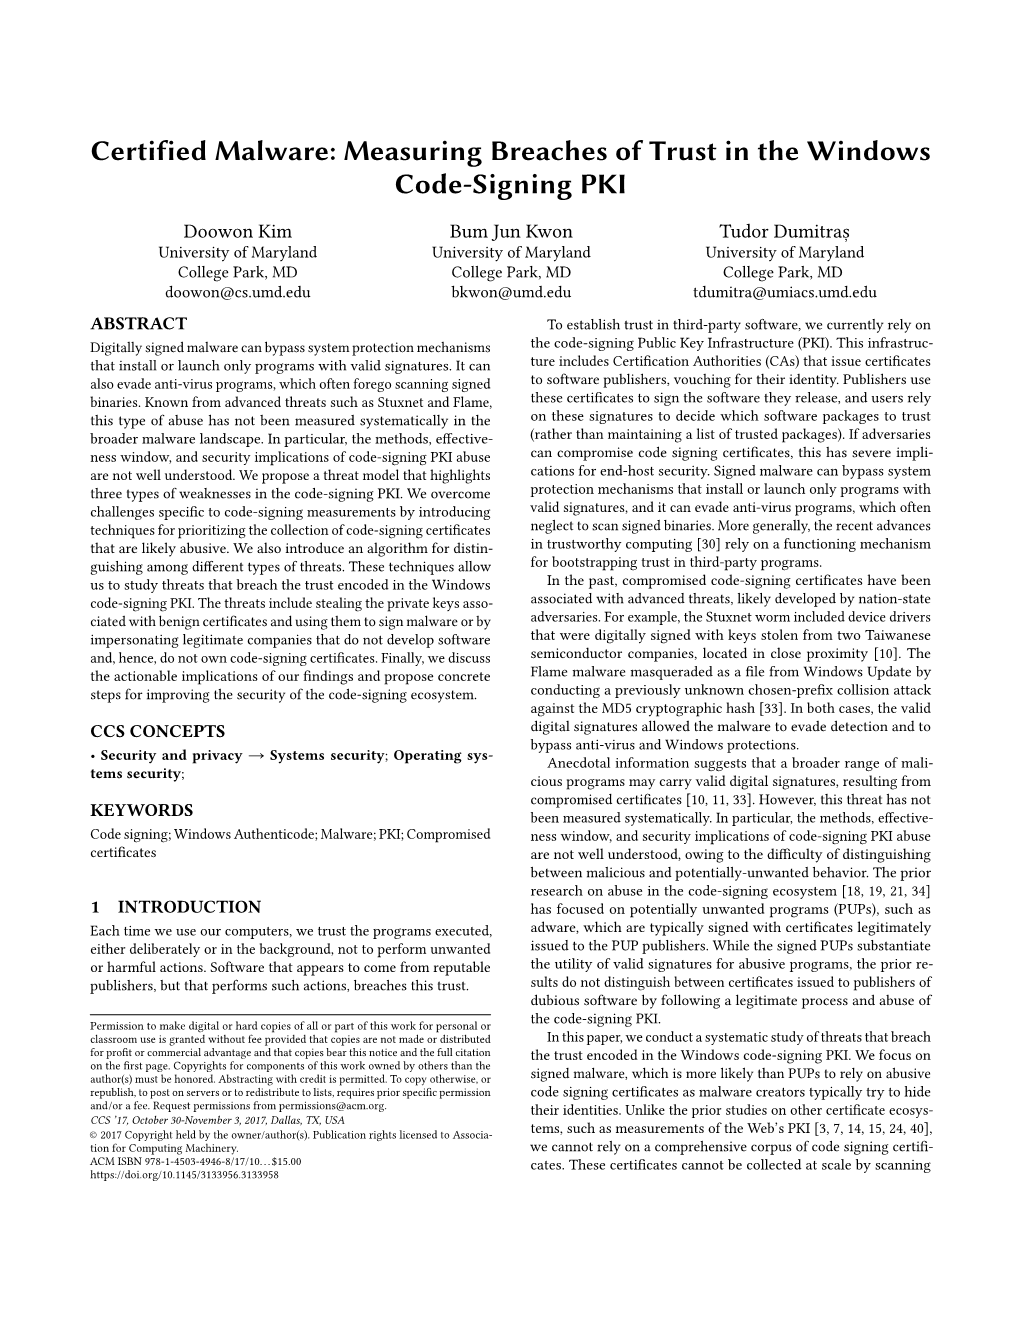 Certified Malware: Measuring Breaches of Trust in the Windows Code-Signing PKI